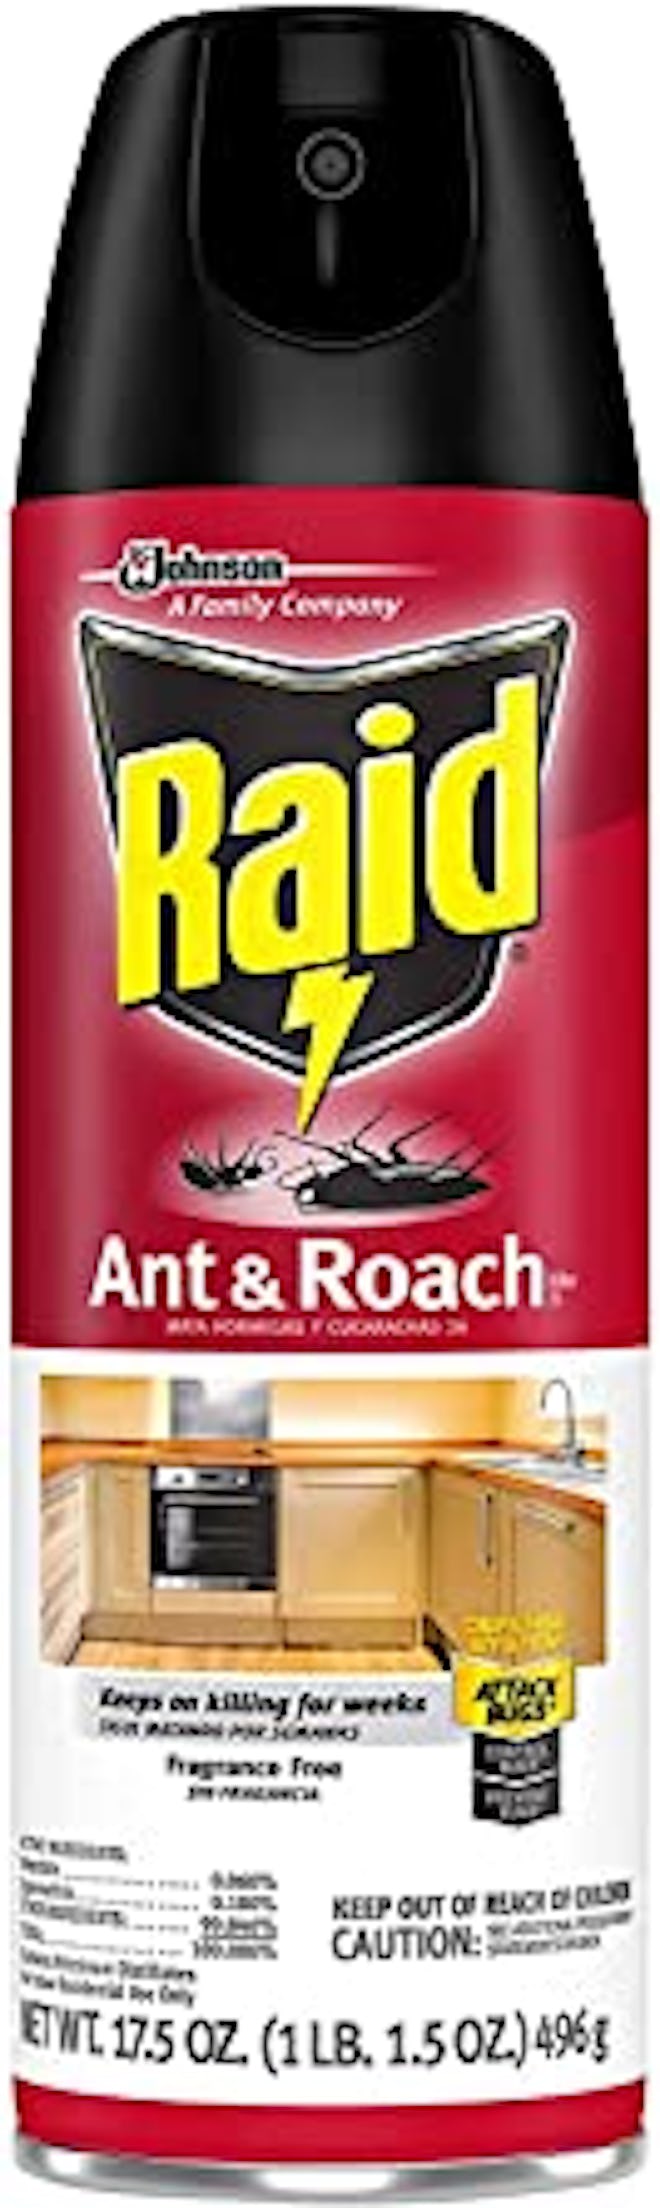 This ant and roach bug spray for home comes in an aerosol can and is fragrance-free. 